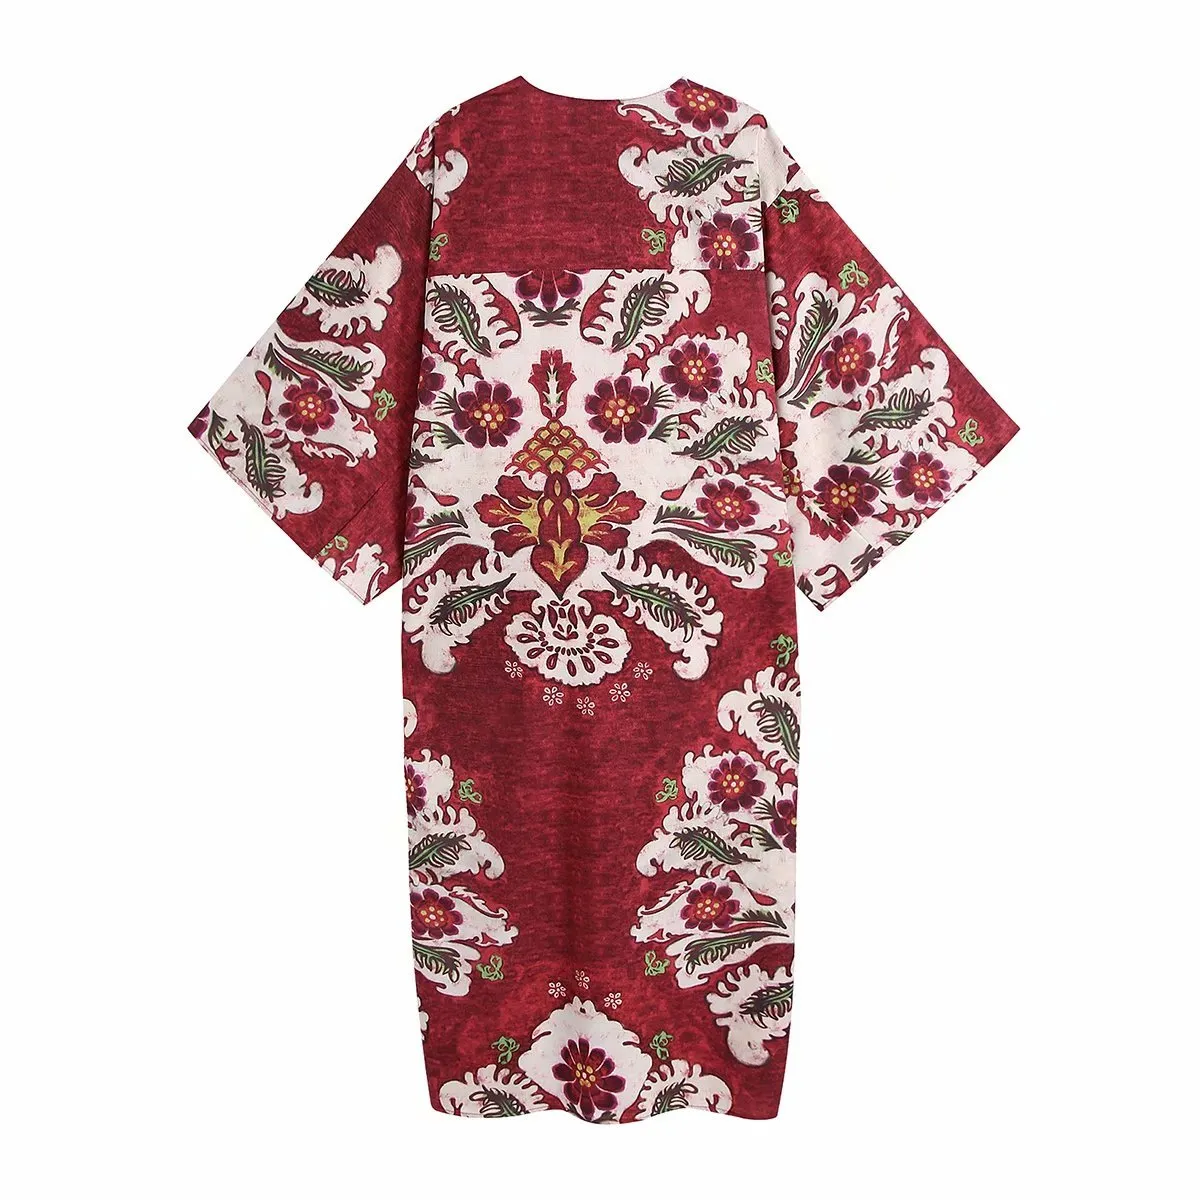 VUWWYV Woman Dresses Red Print Plus Size Midi Women Long Sleeve Vintage Shirt Summer Going Out Vestidos Tied 210430